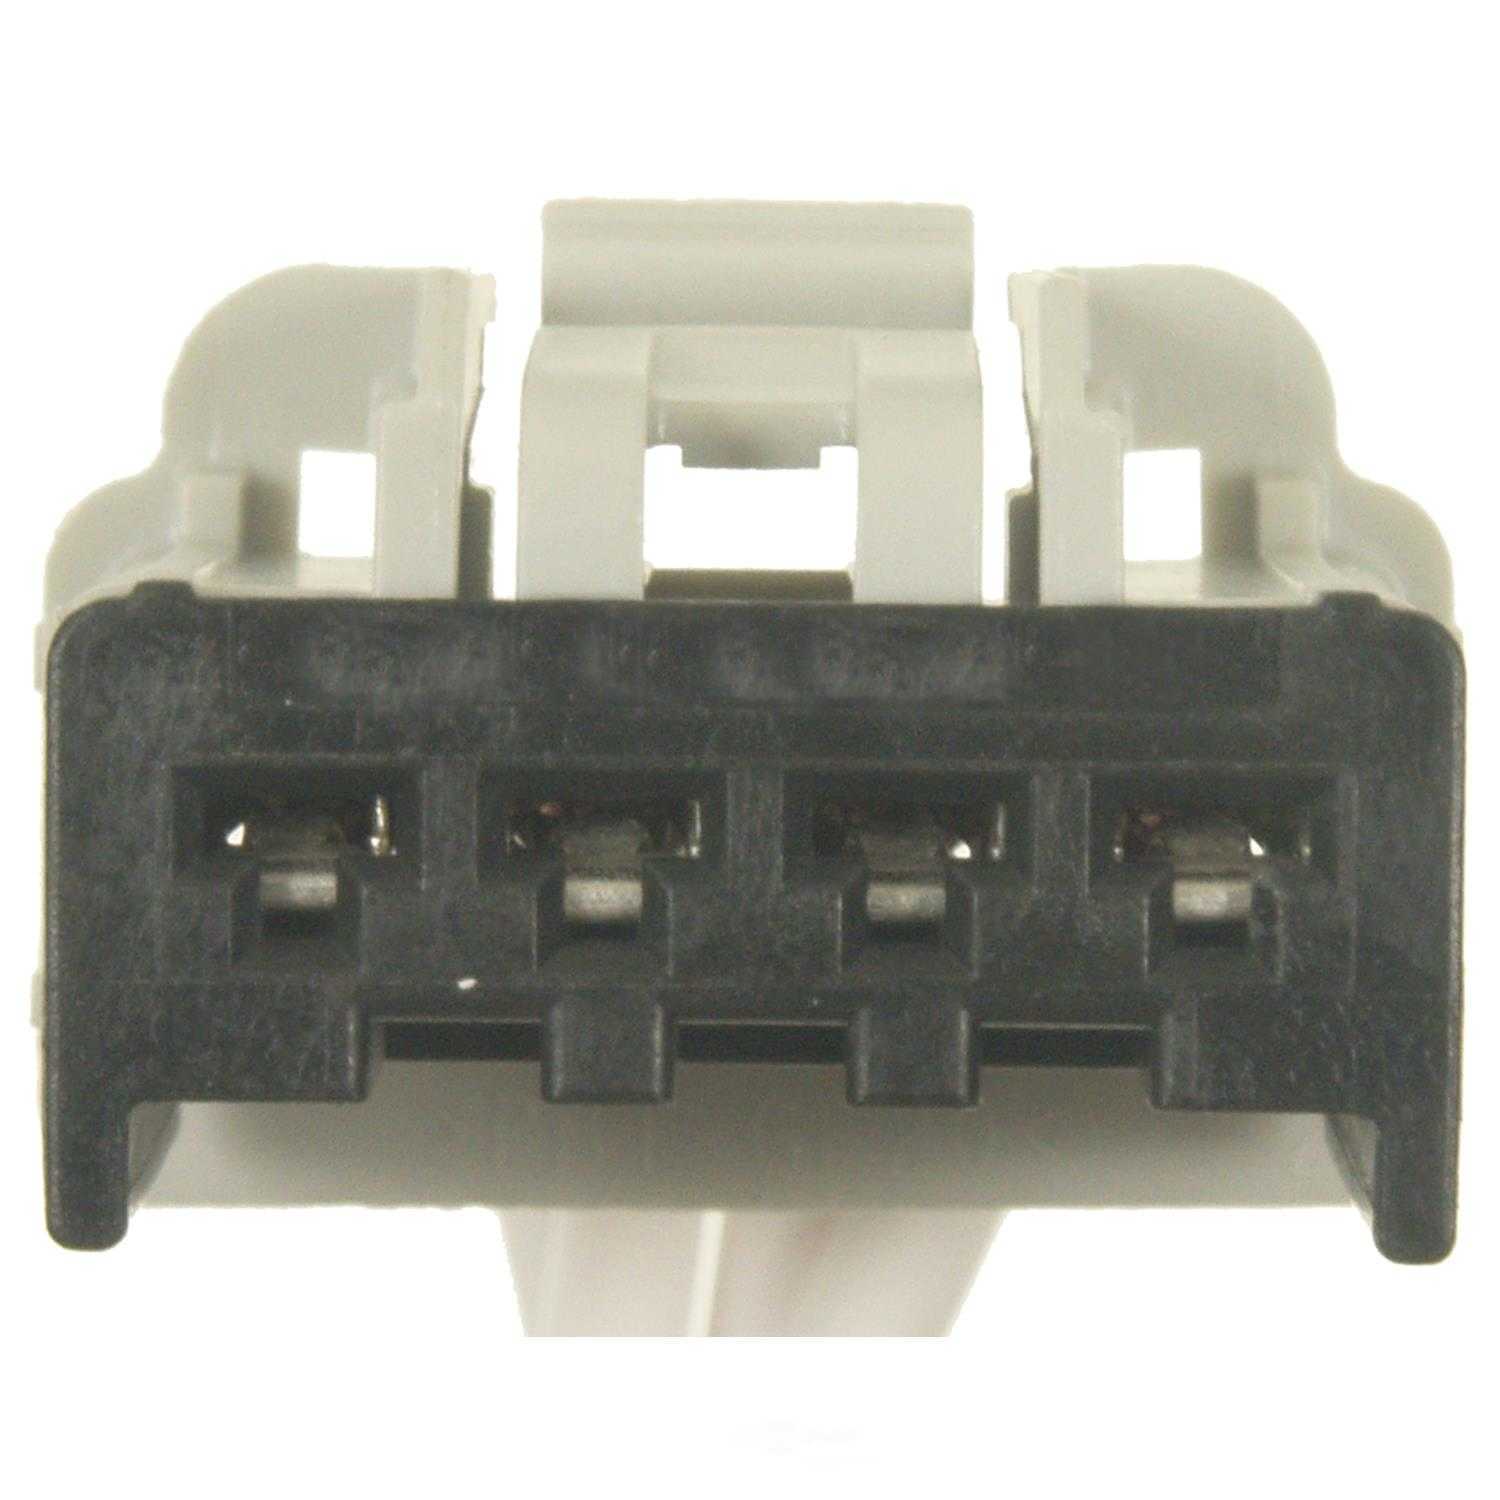 STANDARD MOTOR PRODUCTS - Transfer Case Shift Control Module Connector - STA - s-1698